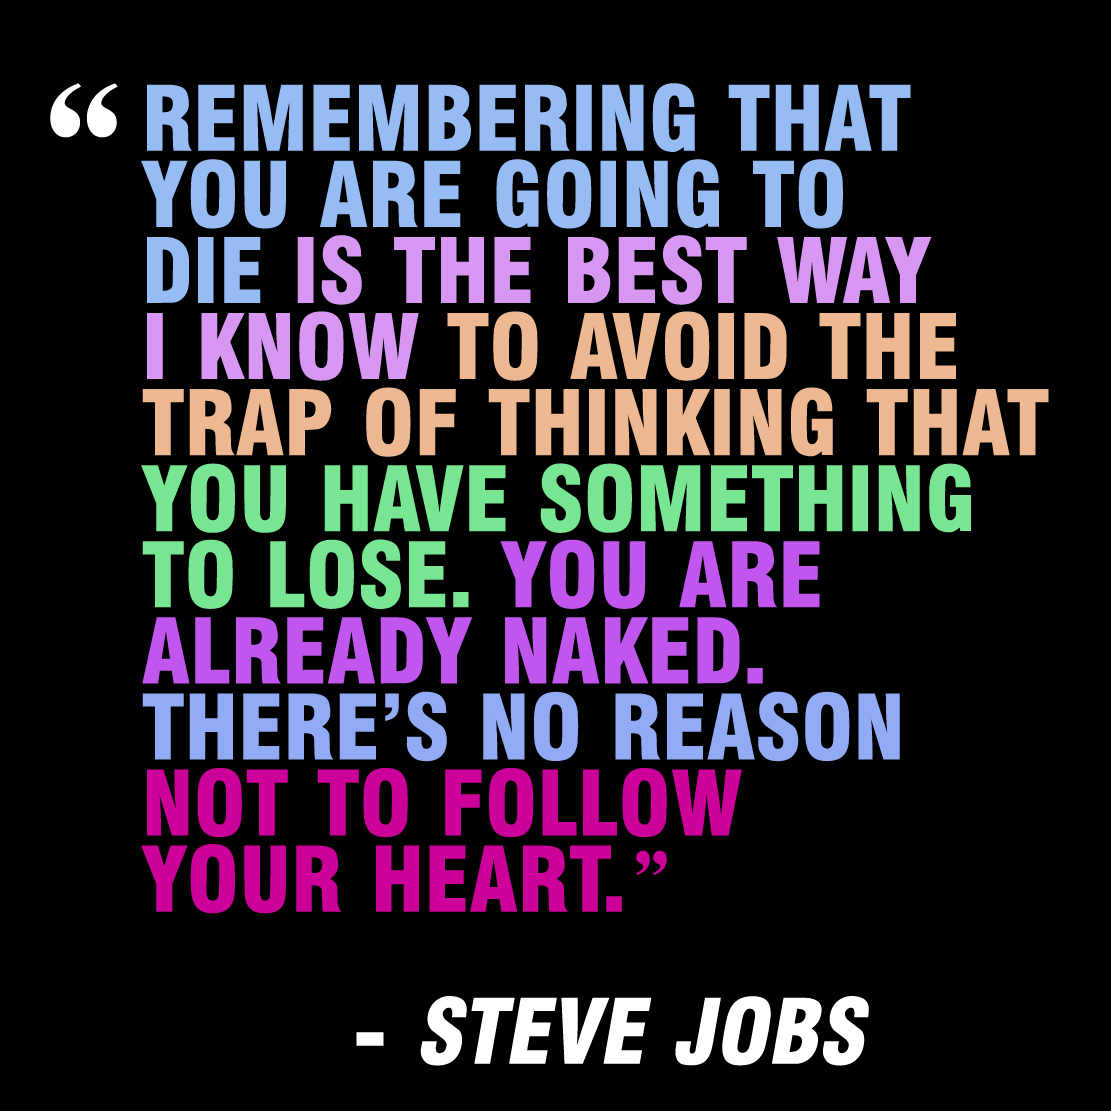 Steve Jobs  Quote (About university trap success stanford speech naked lose life inspirational heart)